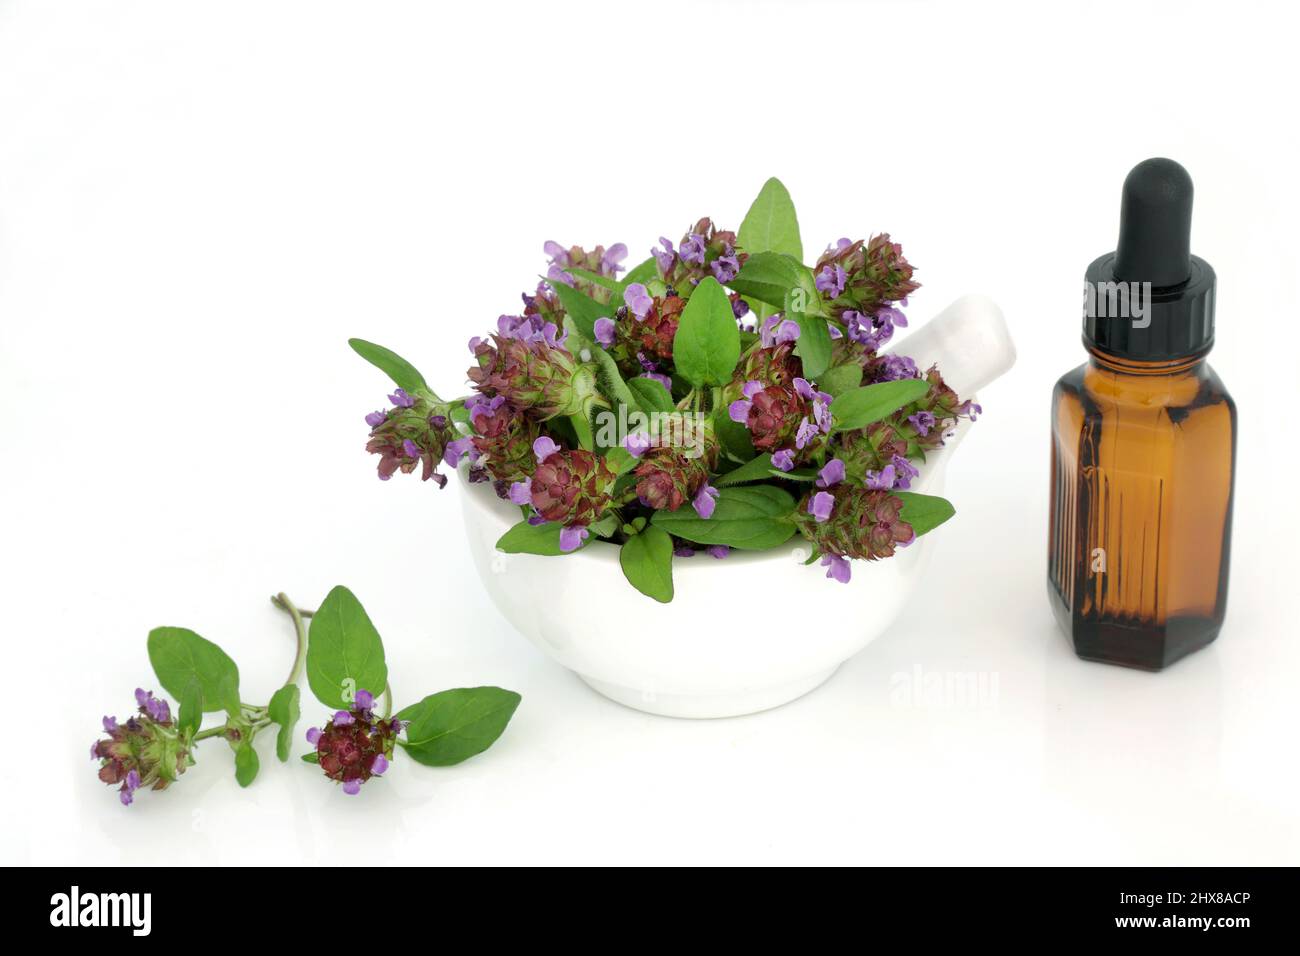 Self heal herb herbal plant medicine with essential oil bottle. Treats diarrhea, colic, upset stomach, crohns disease, gastroenteritis, herpes and ost Stock Photo